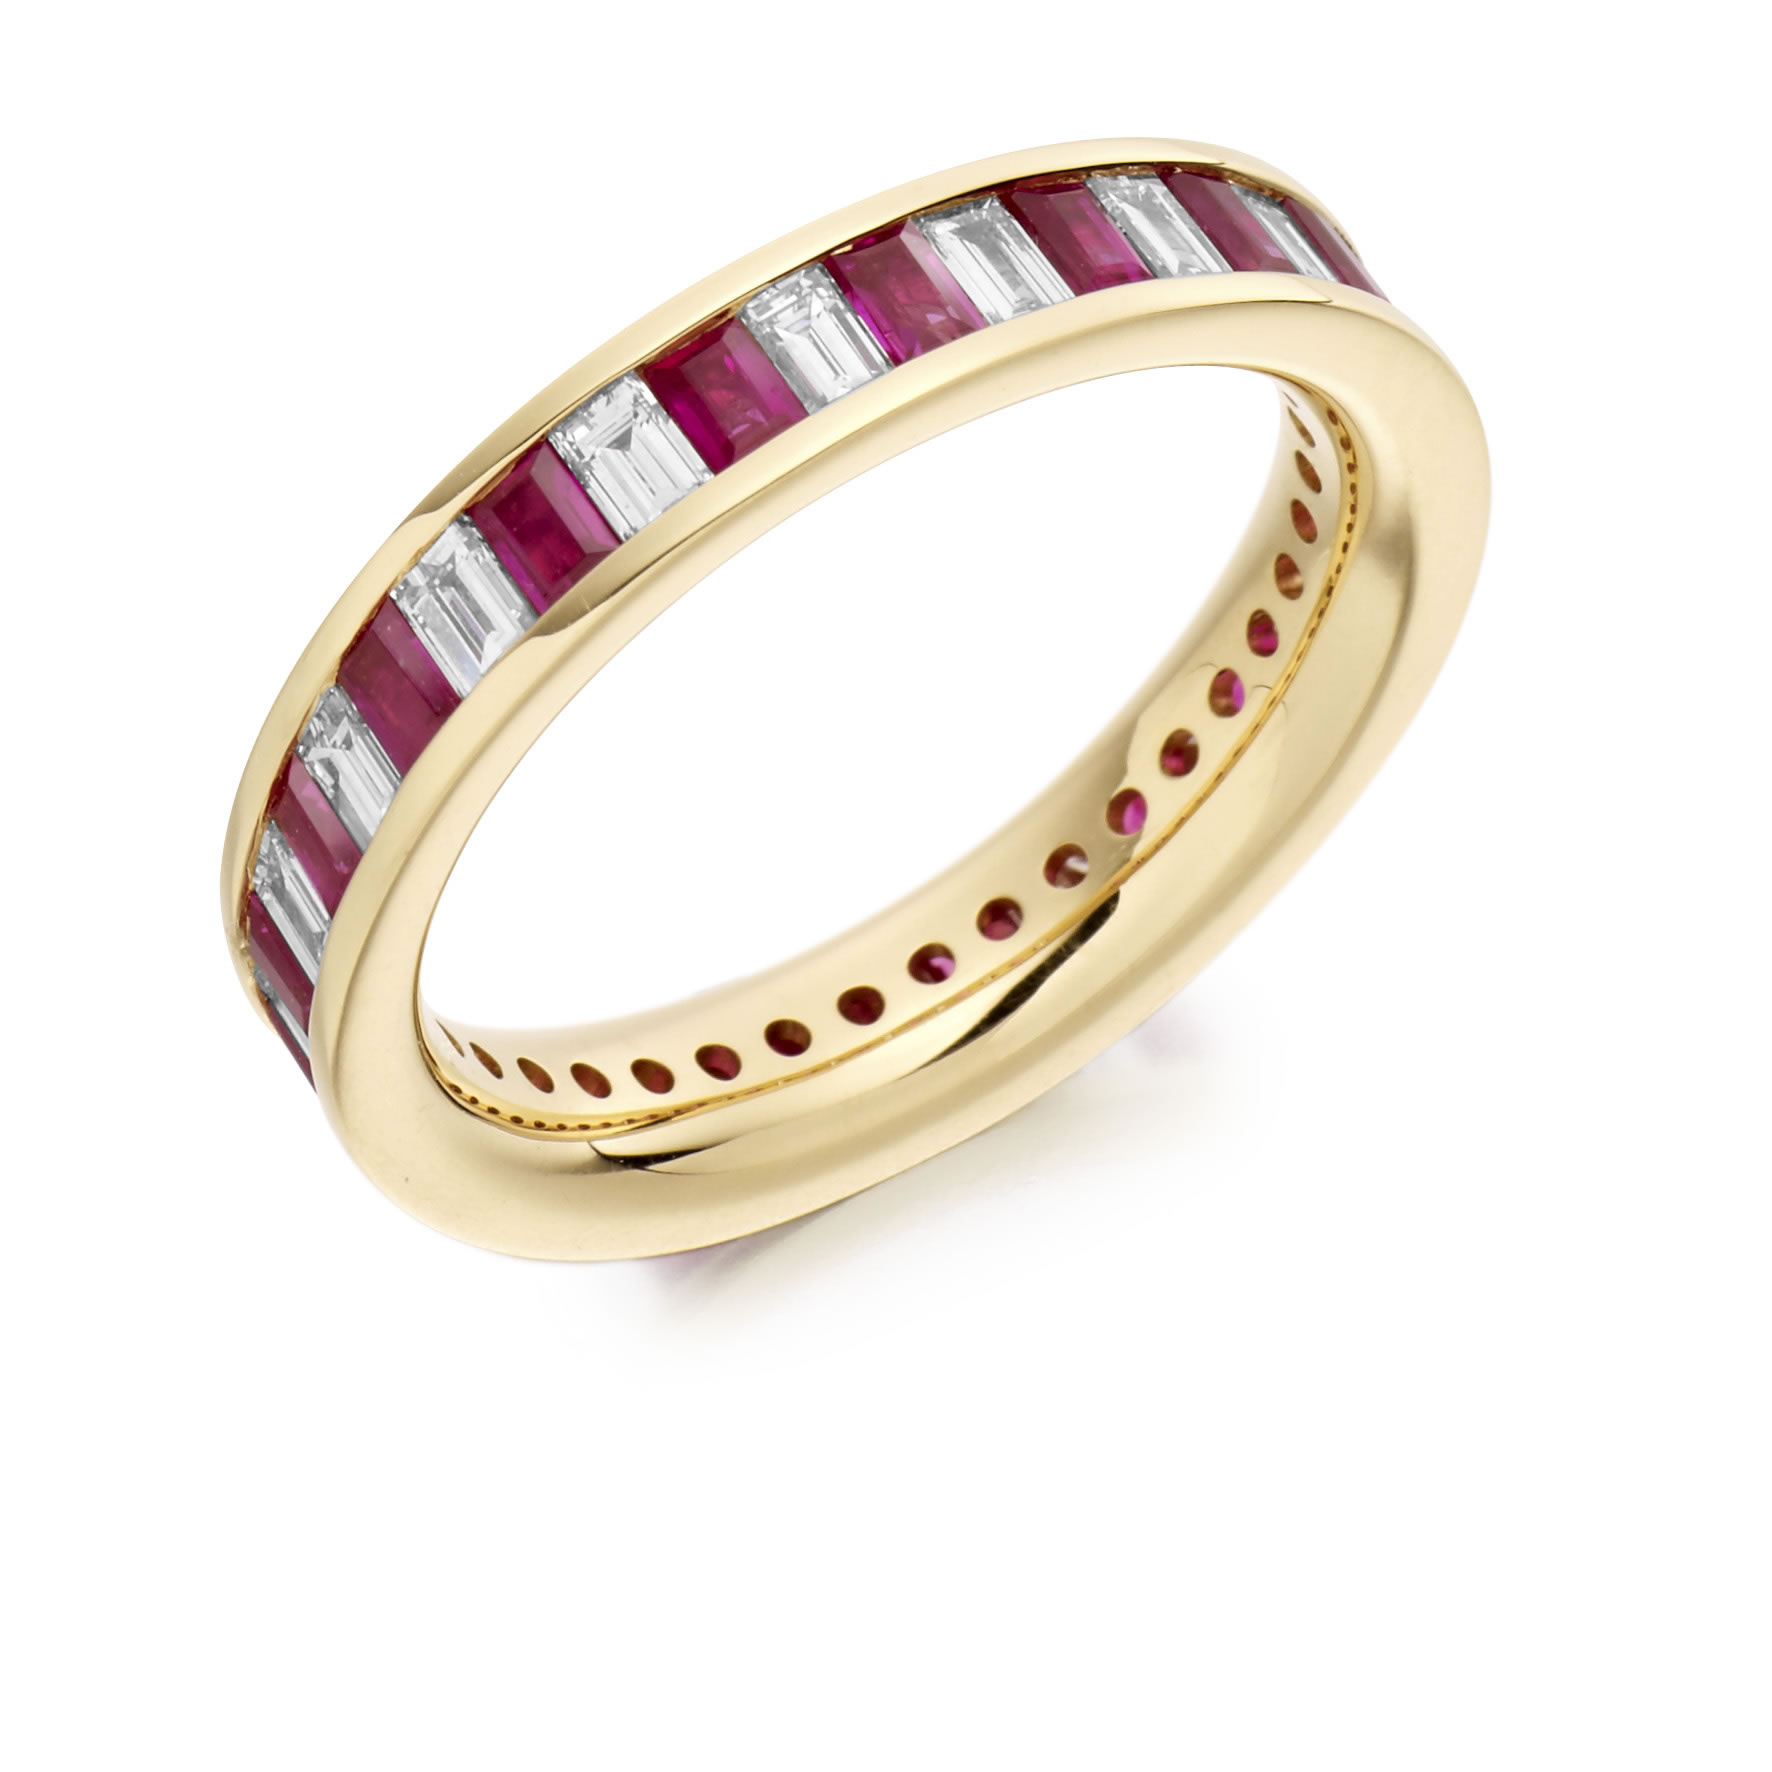 Raphael Full Eternity Ring with Baguette Cut Stone, Ruby and Diamond in Yellow Gold. Stones can be changed for other precious stone; Emeralds & Sapphires. Various metals available also